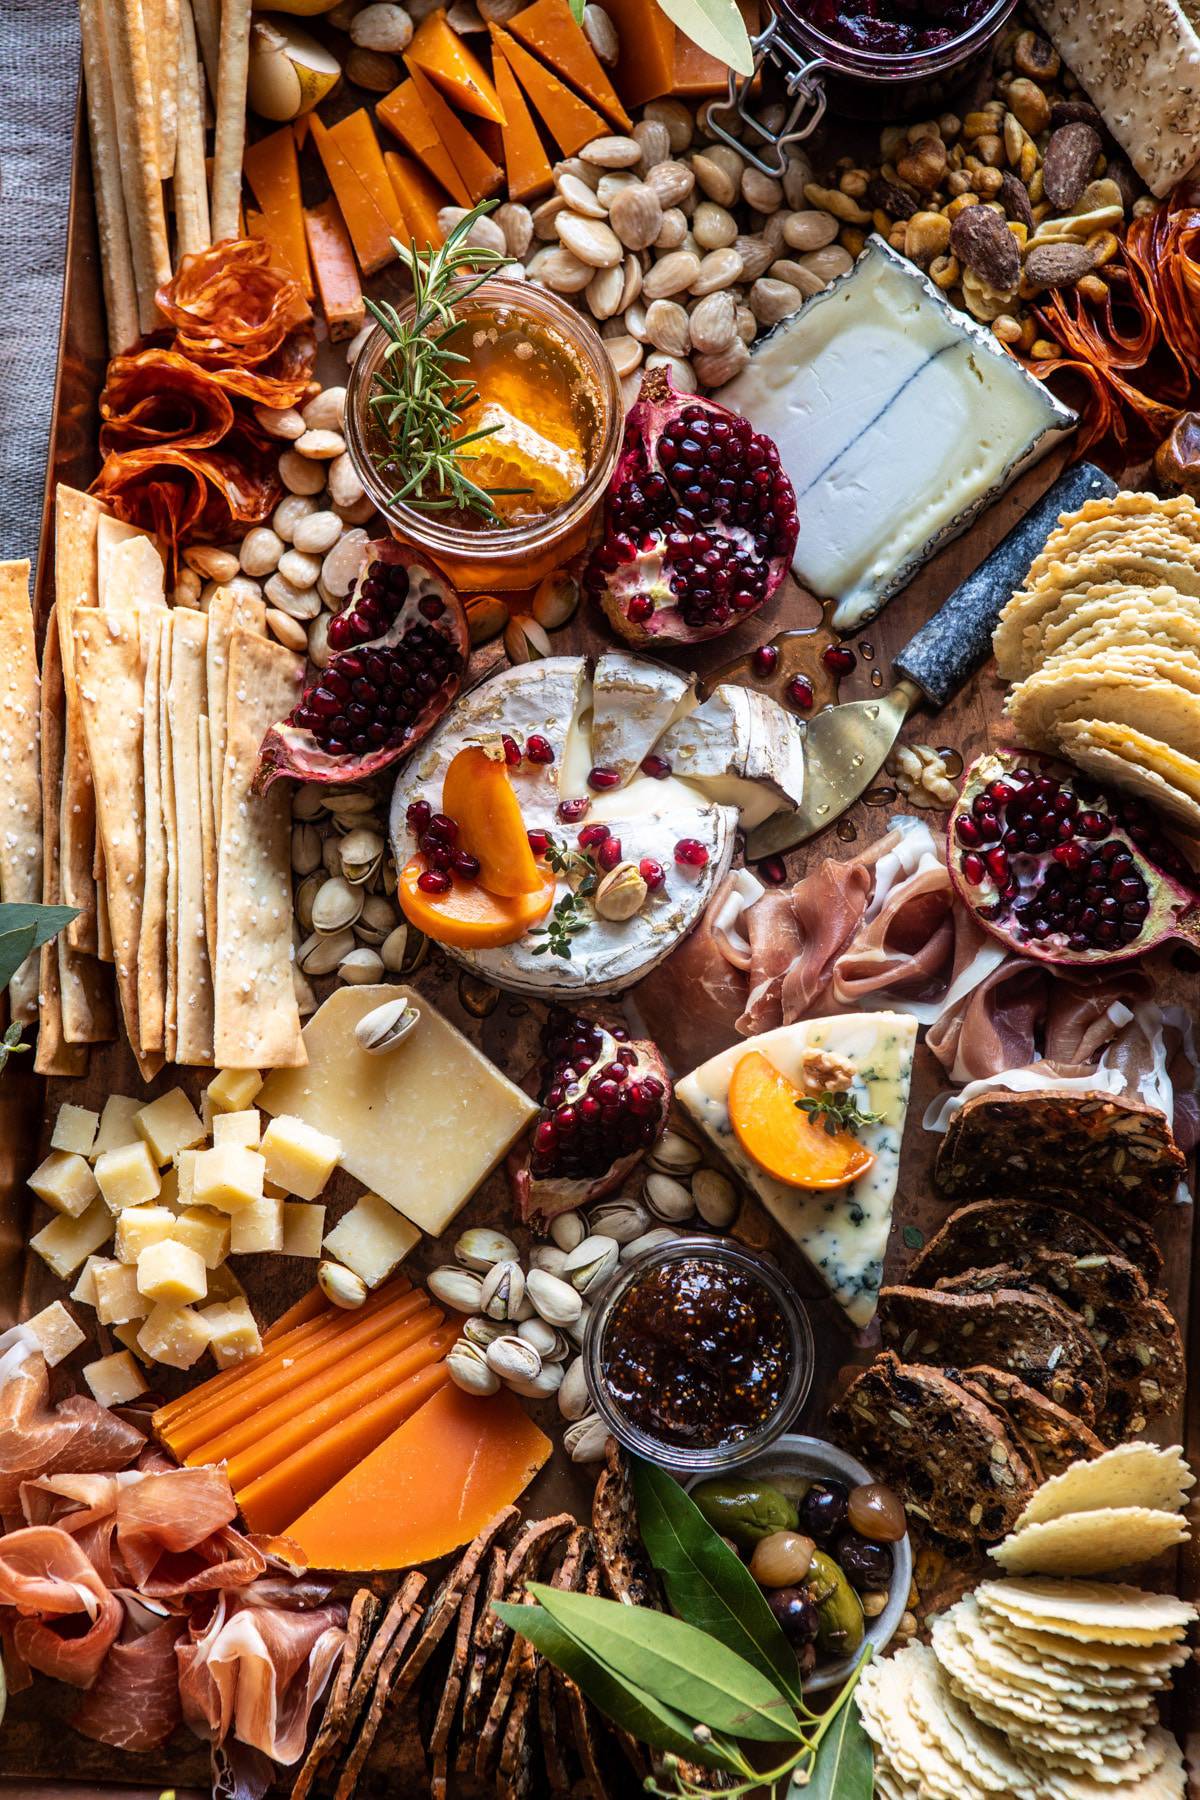 How-to-Make-an-Easy-Holiday-Cheese-Board-8.jpg